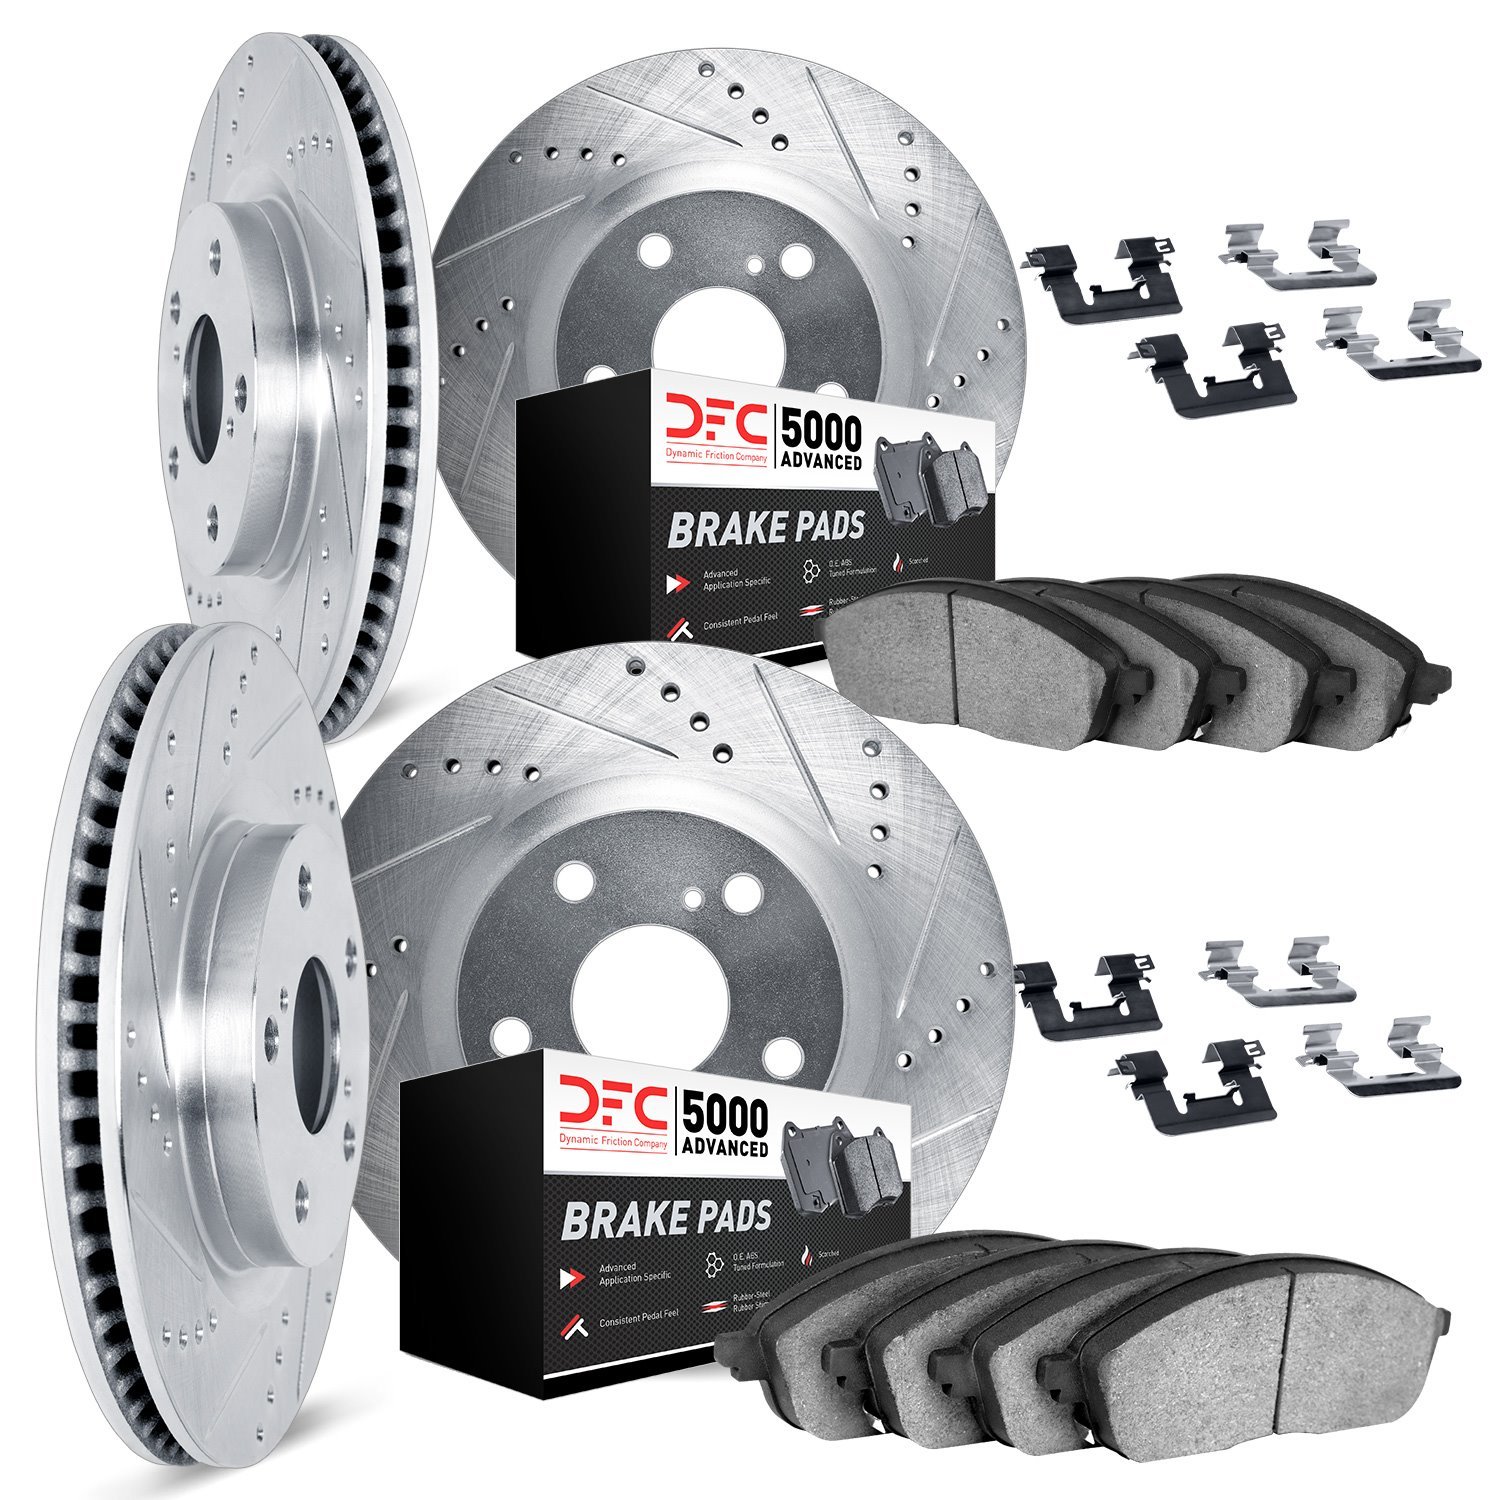 7514-39043 Drilled/Slotted Brake Rotors w/5000 Advanced Brake Pads Kit & Hardware [Silver], 2005-2018 Mopar, Position: Front and